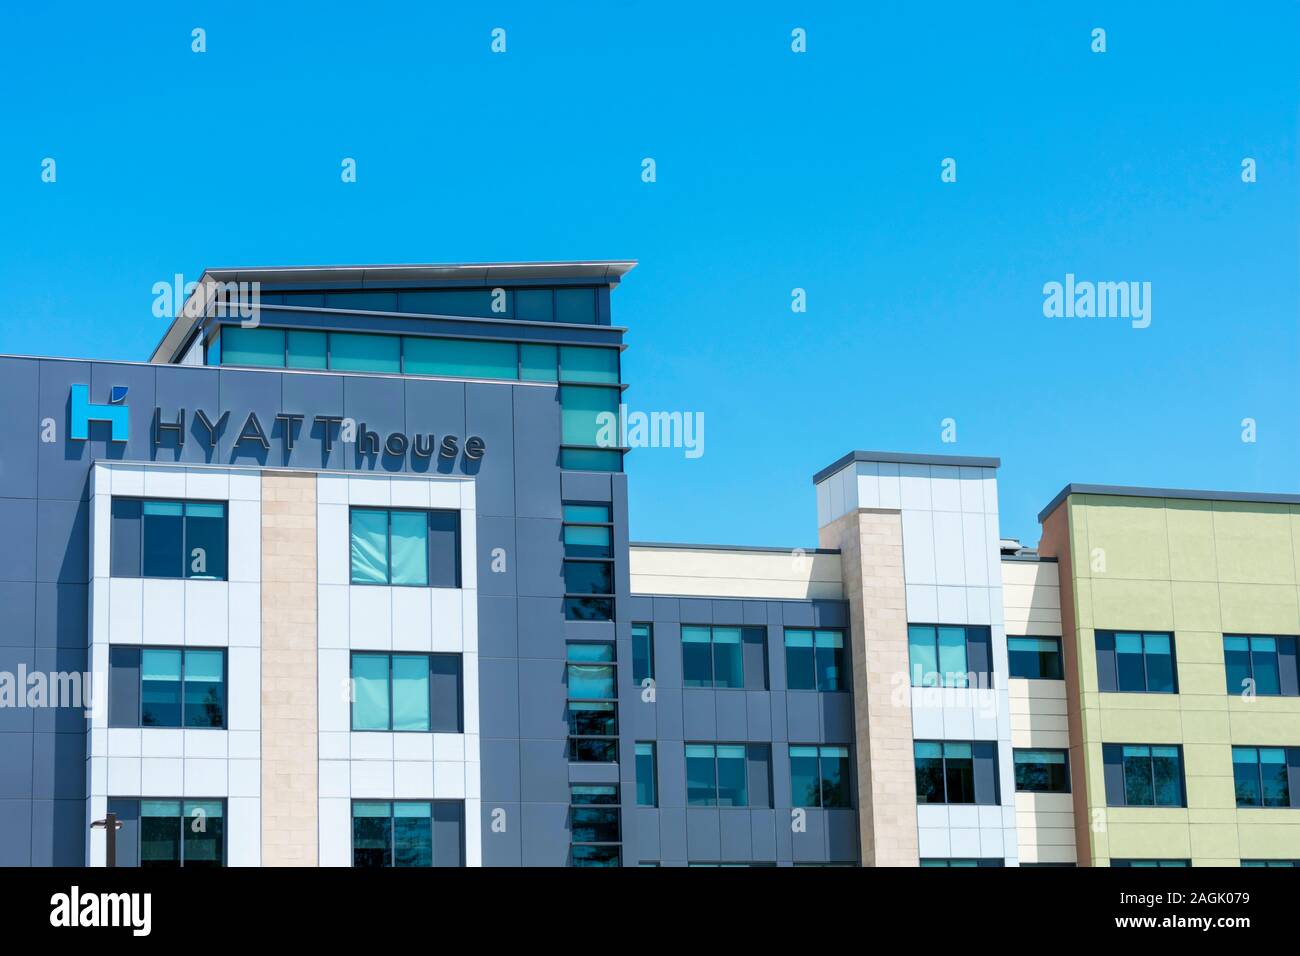 Hyatt House Hotel extended-stay hotel at Vallco Fashion Park near the corporate headquarters of Apple - Cupertino, California, USA - May 7, 2019 Stock Photo